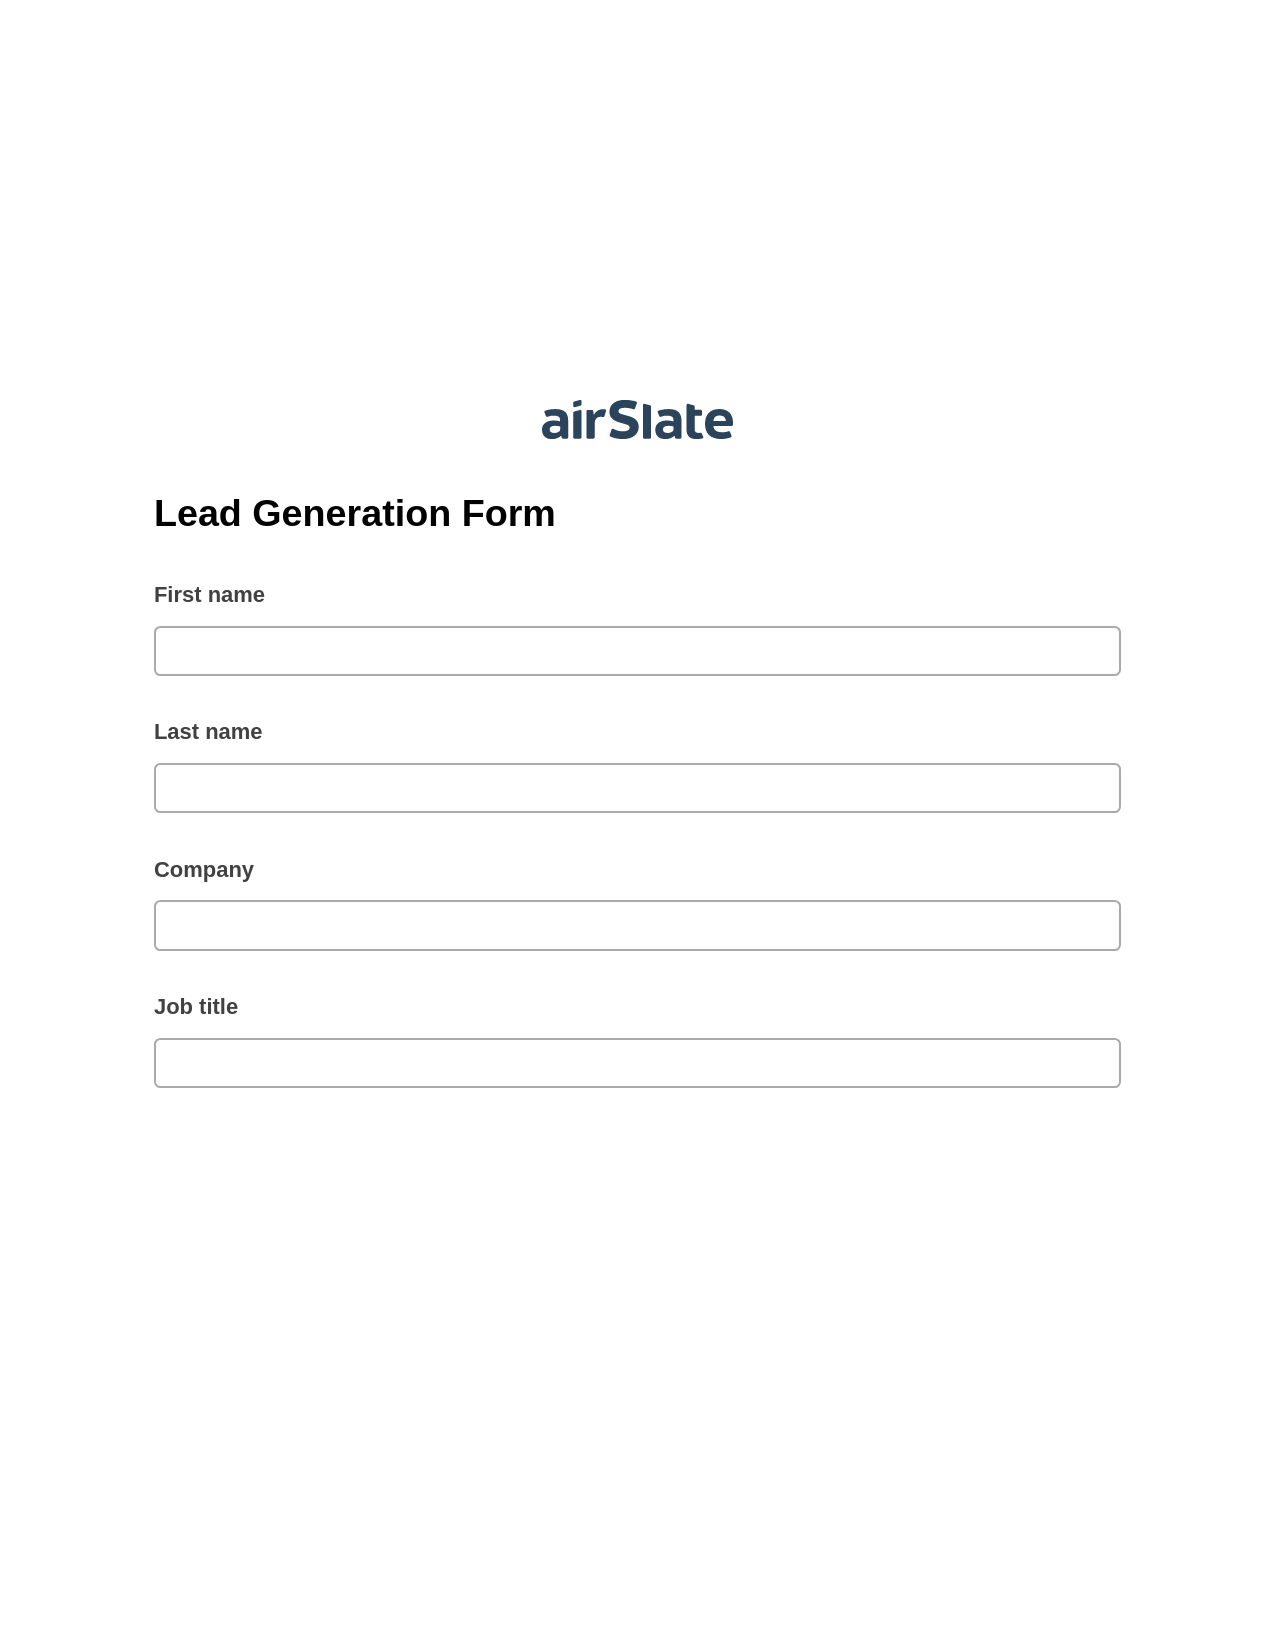 Lead Generation Form Pre-fill from CSV File Bot, Send a Slate with Roles Bot, Export to Salesforce Record Bot